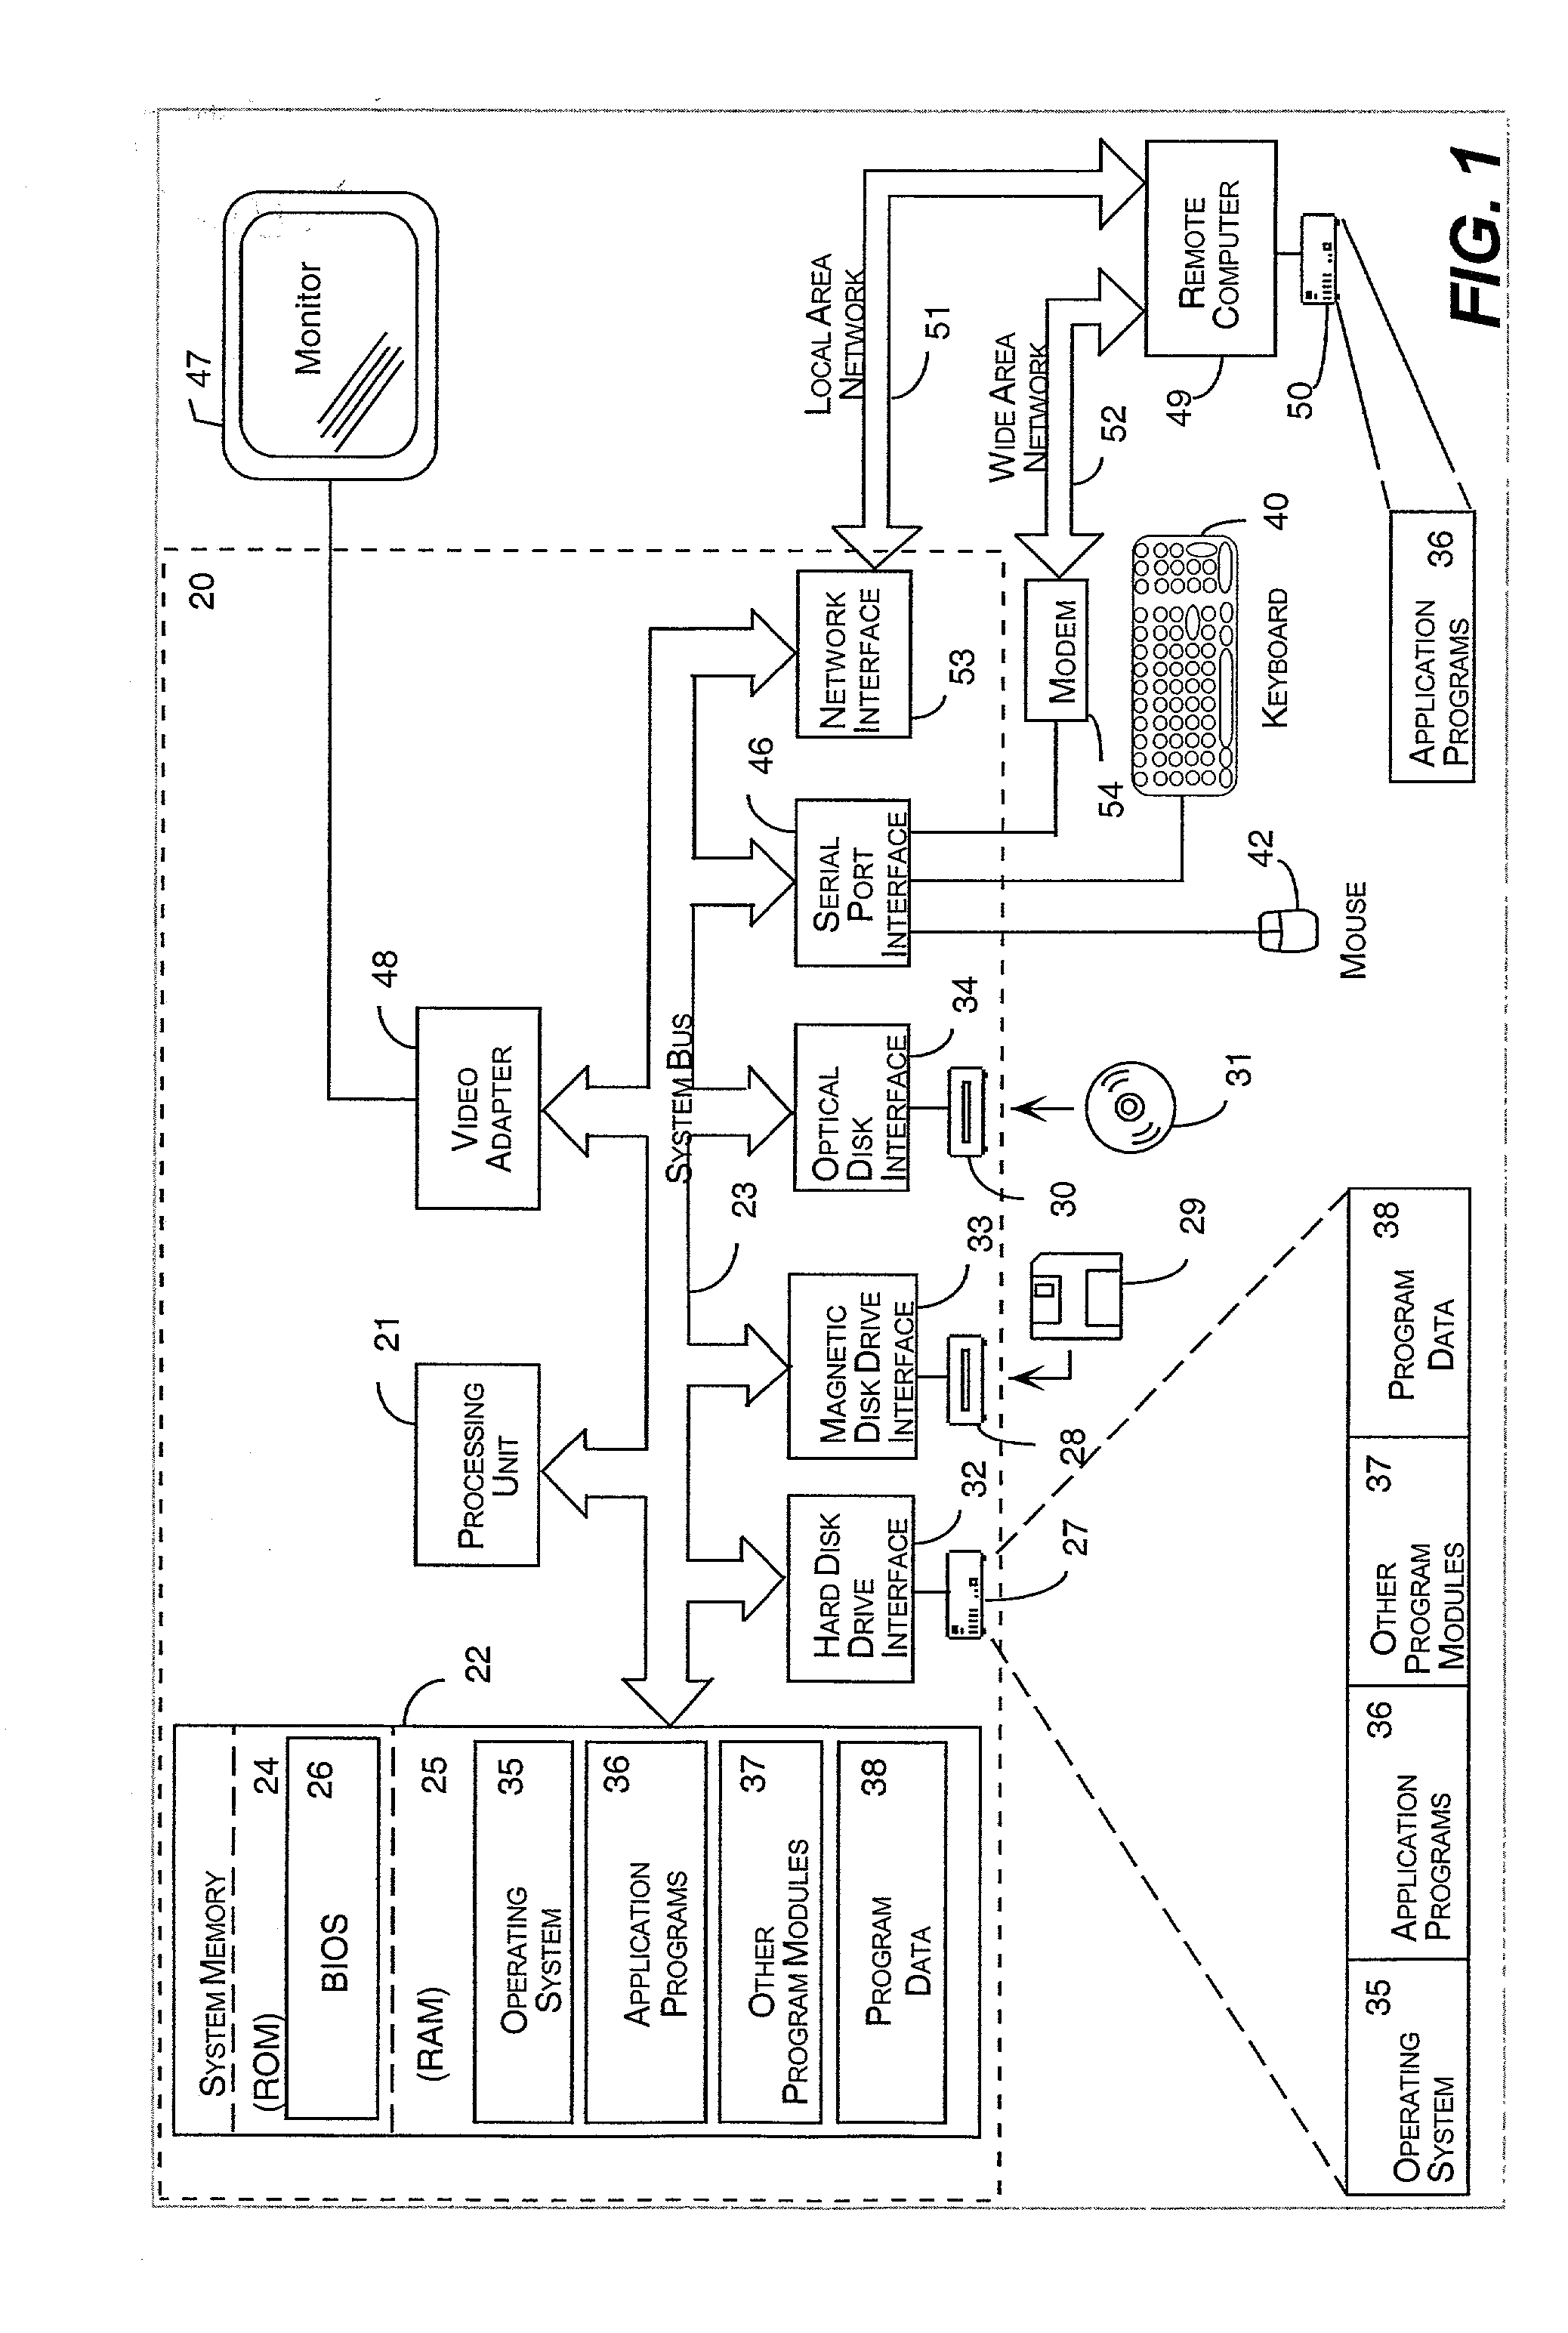 Method for optimizing the performance of a database